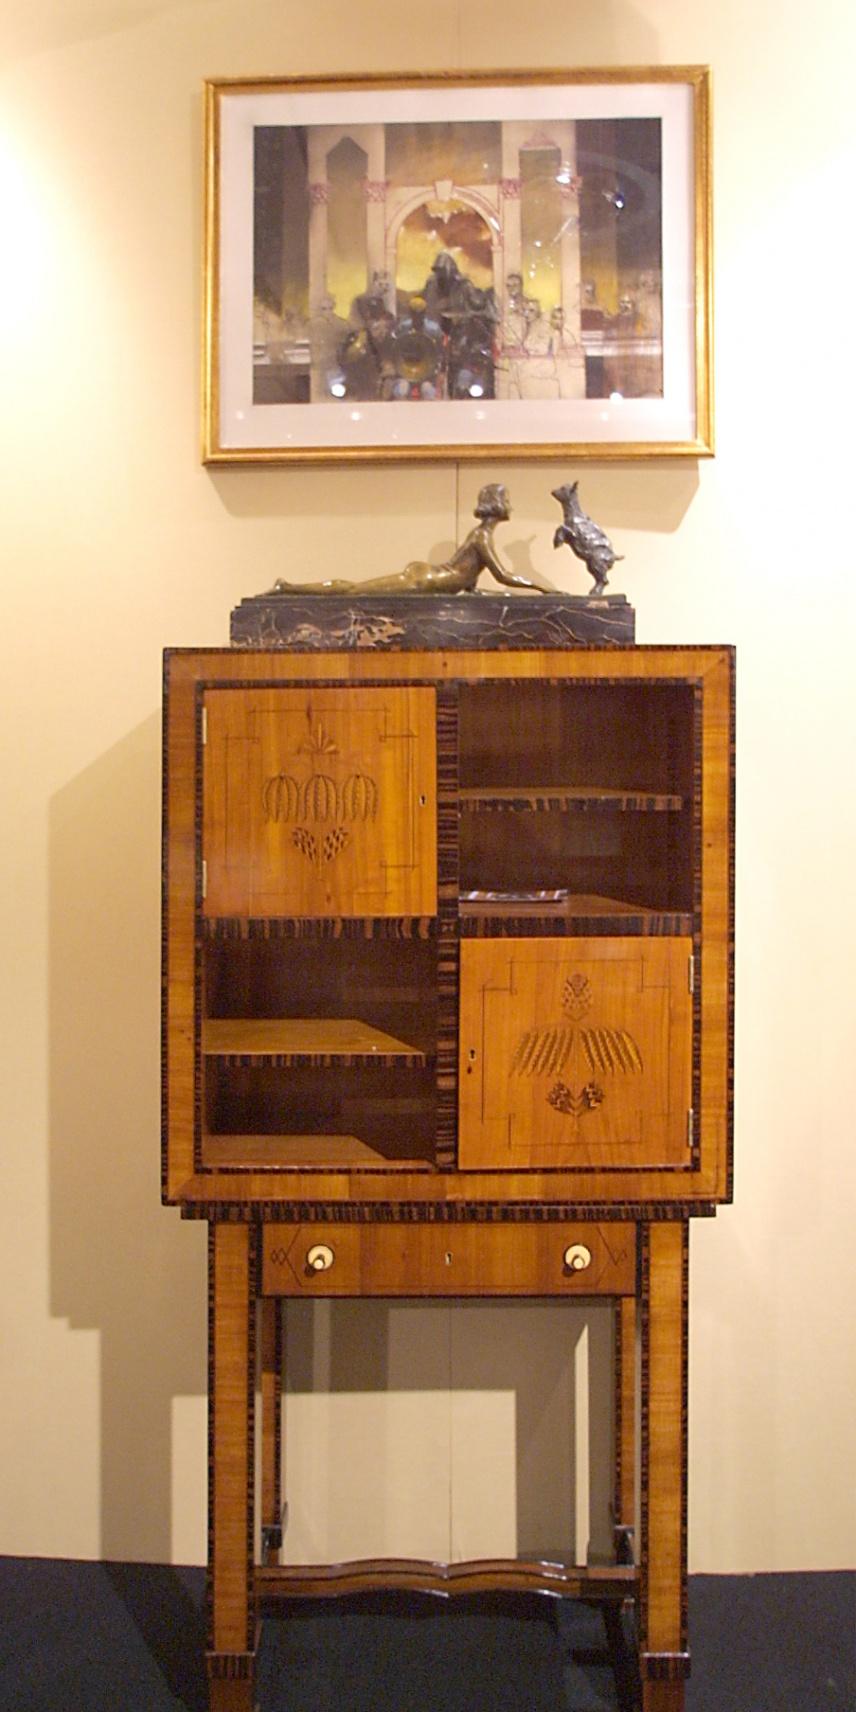 Furniture for havana cigars, puros, attributed to Koloman Moser and Wiener Werkstatte.

Material: wood
Style: Vienna Secession
Country: Vienna
If you have any questions we are at your disposal.
Pushing the button that reads 'View All From Seller'.